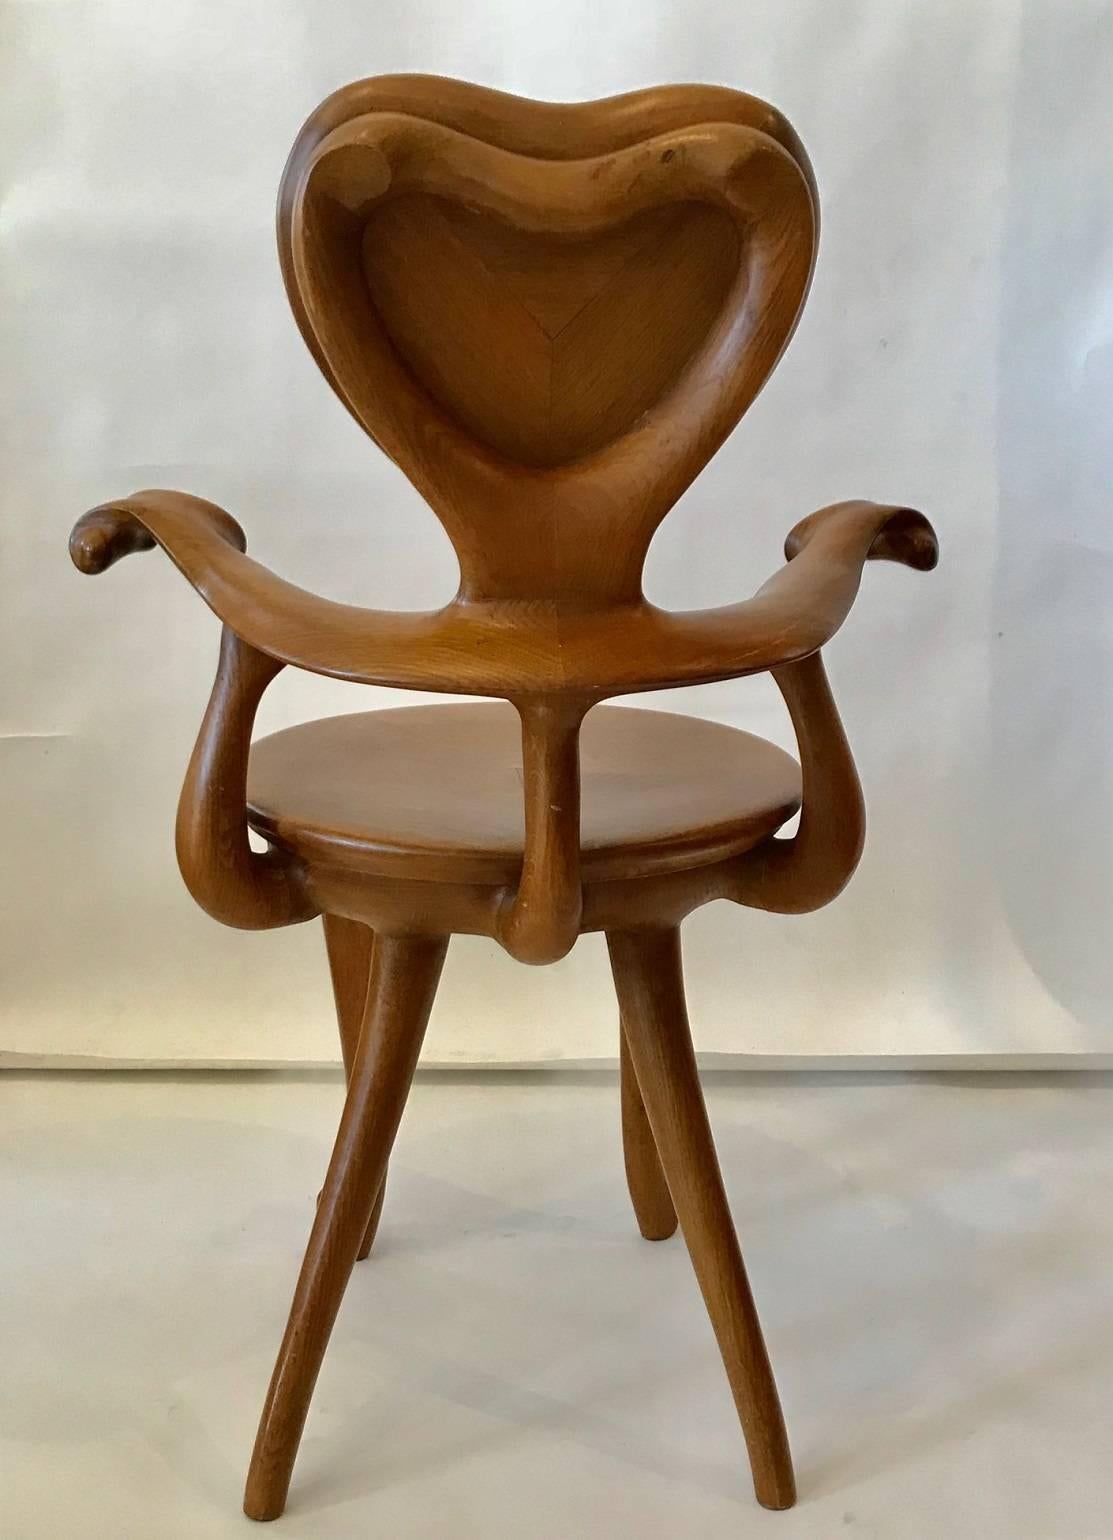 Iconic Calvet armchair by Antoni Gaudi, designed 1902 for Gaudi's Casa Calvet; manufactured by BDBarcelona, circa 1990; the sculptural form realized in solid varnish oak.